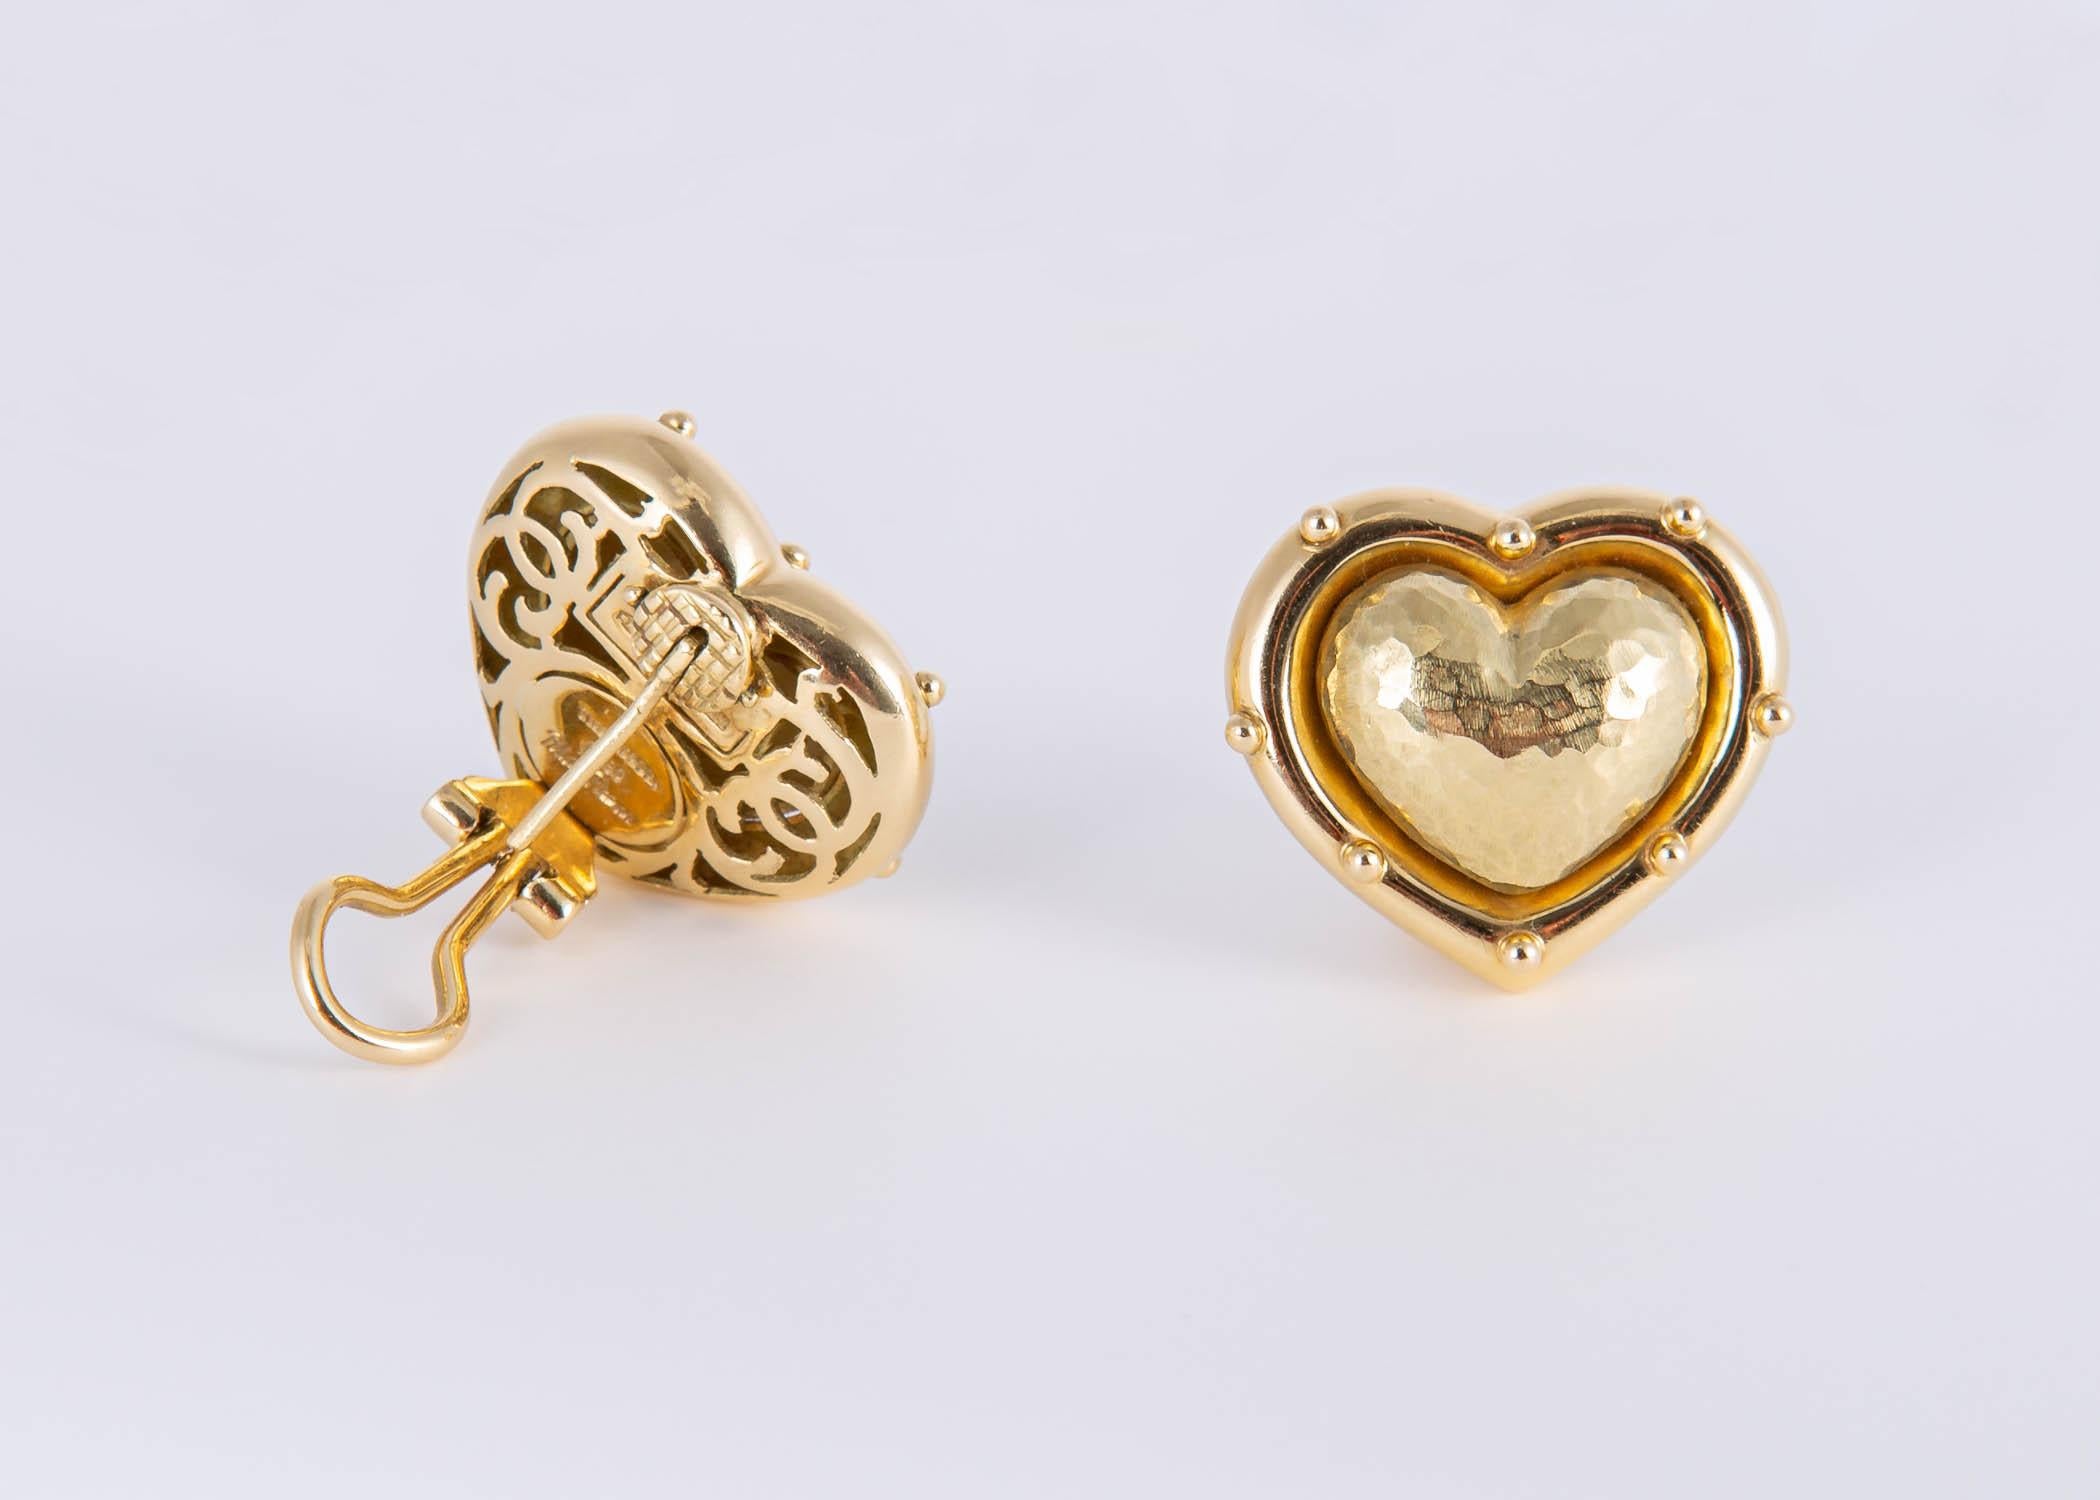 Paloma Picasso created this iconic design back in 1990. Her textured hand finished detailing makes a classic heart shape special. 7/8's of an inch in size.